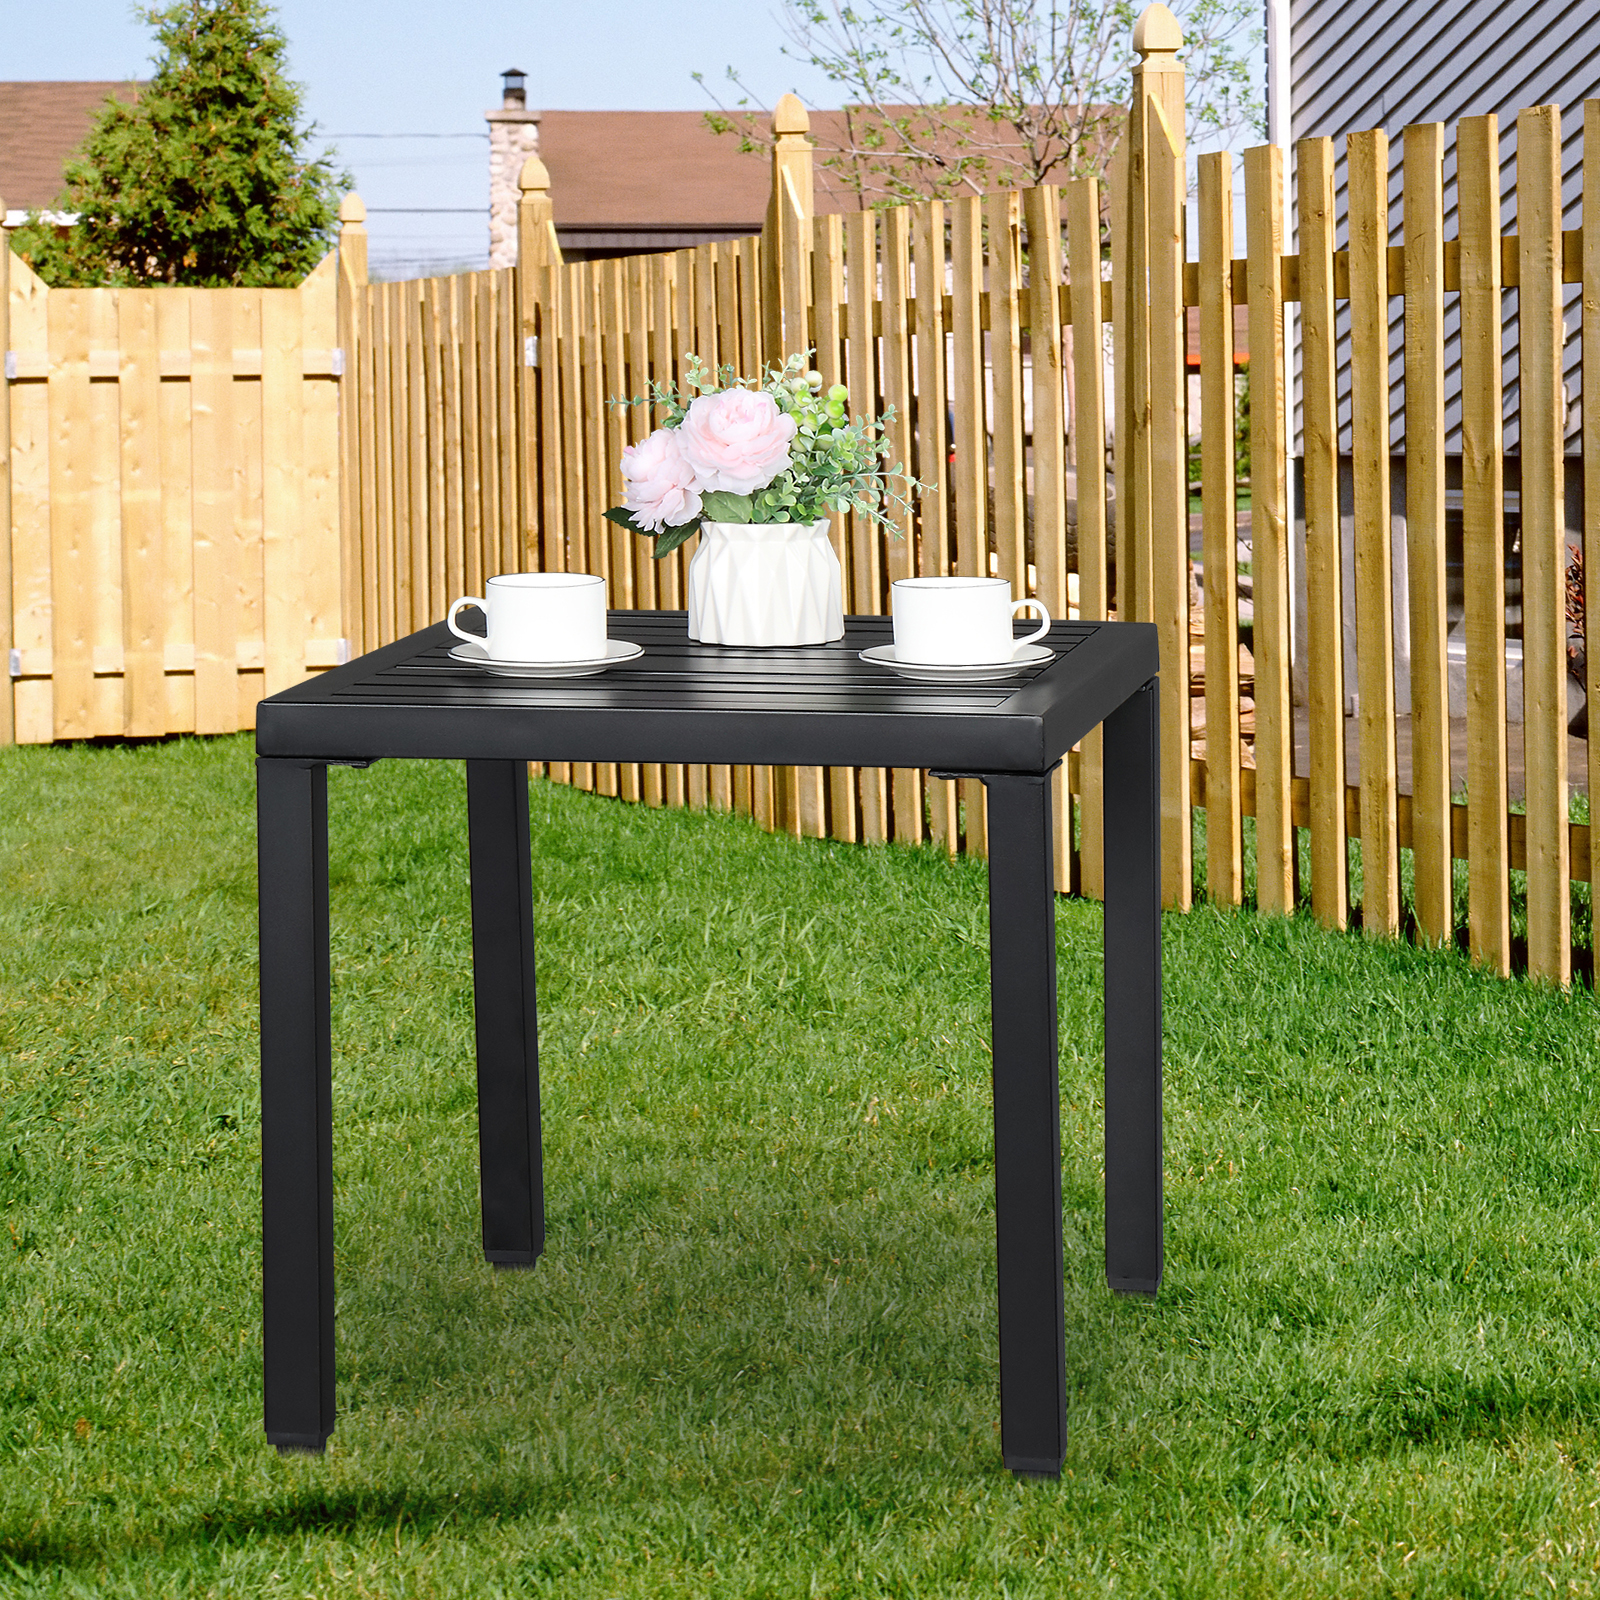 Metal Patio Table, BTMWAY Outdoor Dining Table Square Iron Bar Table, All-weather Outside Conversation Coffee Table with Metal Frame, Black Bistro Side Table for Garden Pool Lawn Balcony - image 1 of 11